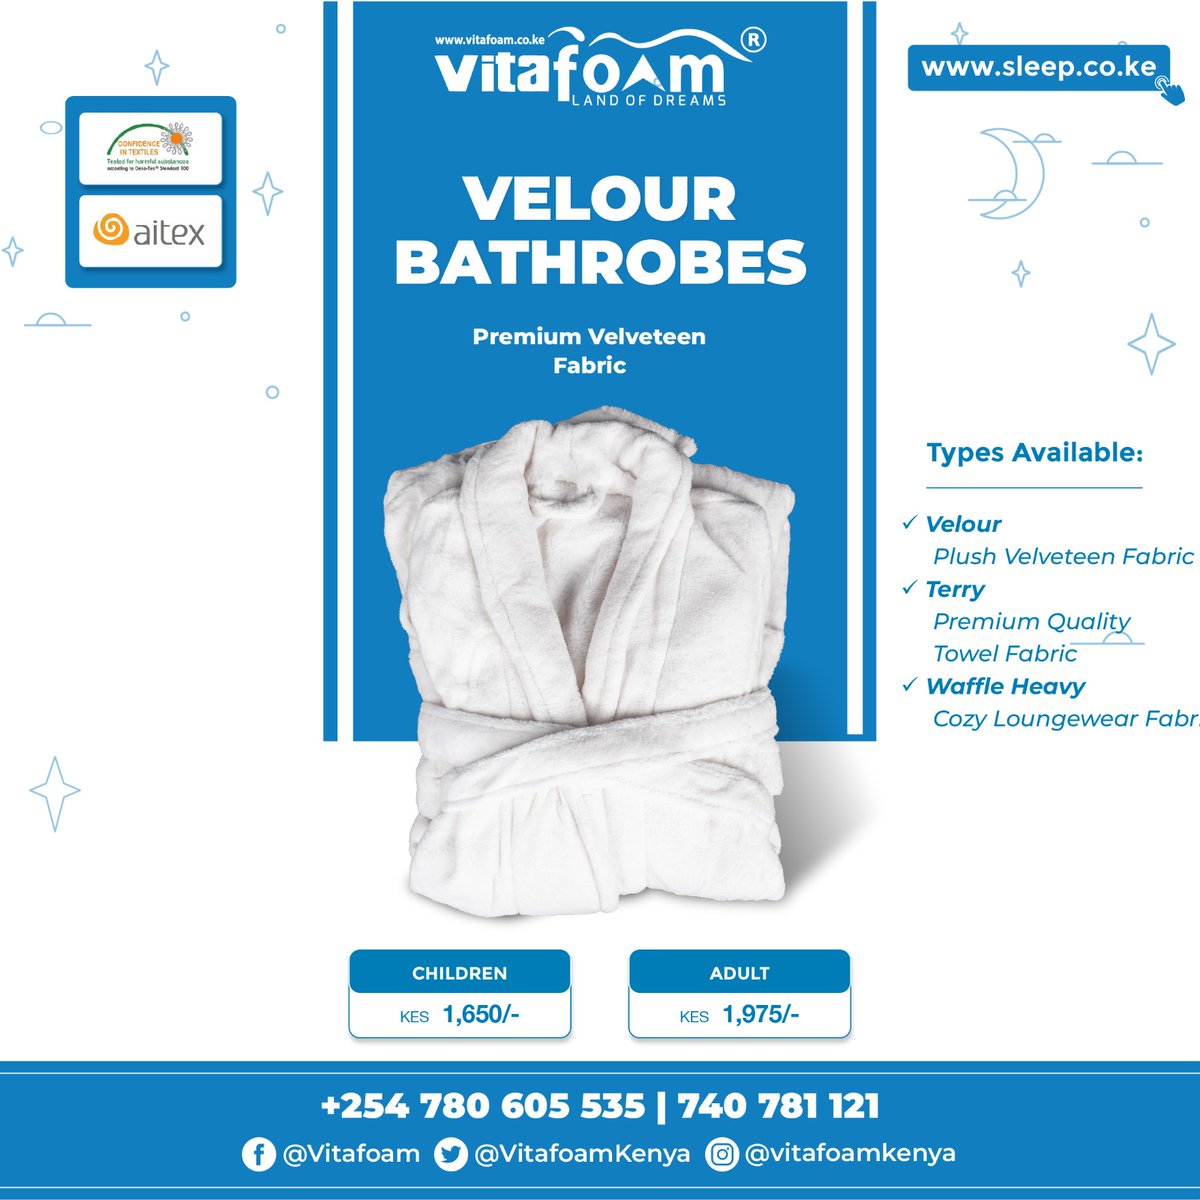 🌟🤗☁️🚿🙋‍♂️ Get Comfy with our Amazing Velour® Bathrobes only from #VitaFoamKenya®! 🙋‍♀️🏊‍♀️☁️🤗🌟 ☎ For All Product *Enquiries, *Orders & *Deliveries Call Our Hotlines >> +254 780 605 535 | 784 857 121 | 740 781 121 📍 Our Locations >> bit.ly/30VqOrf